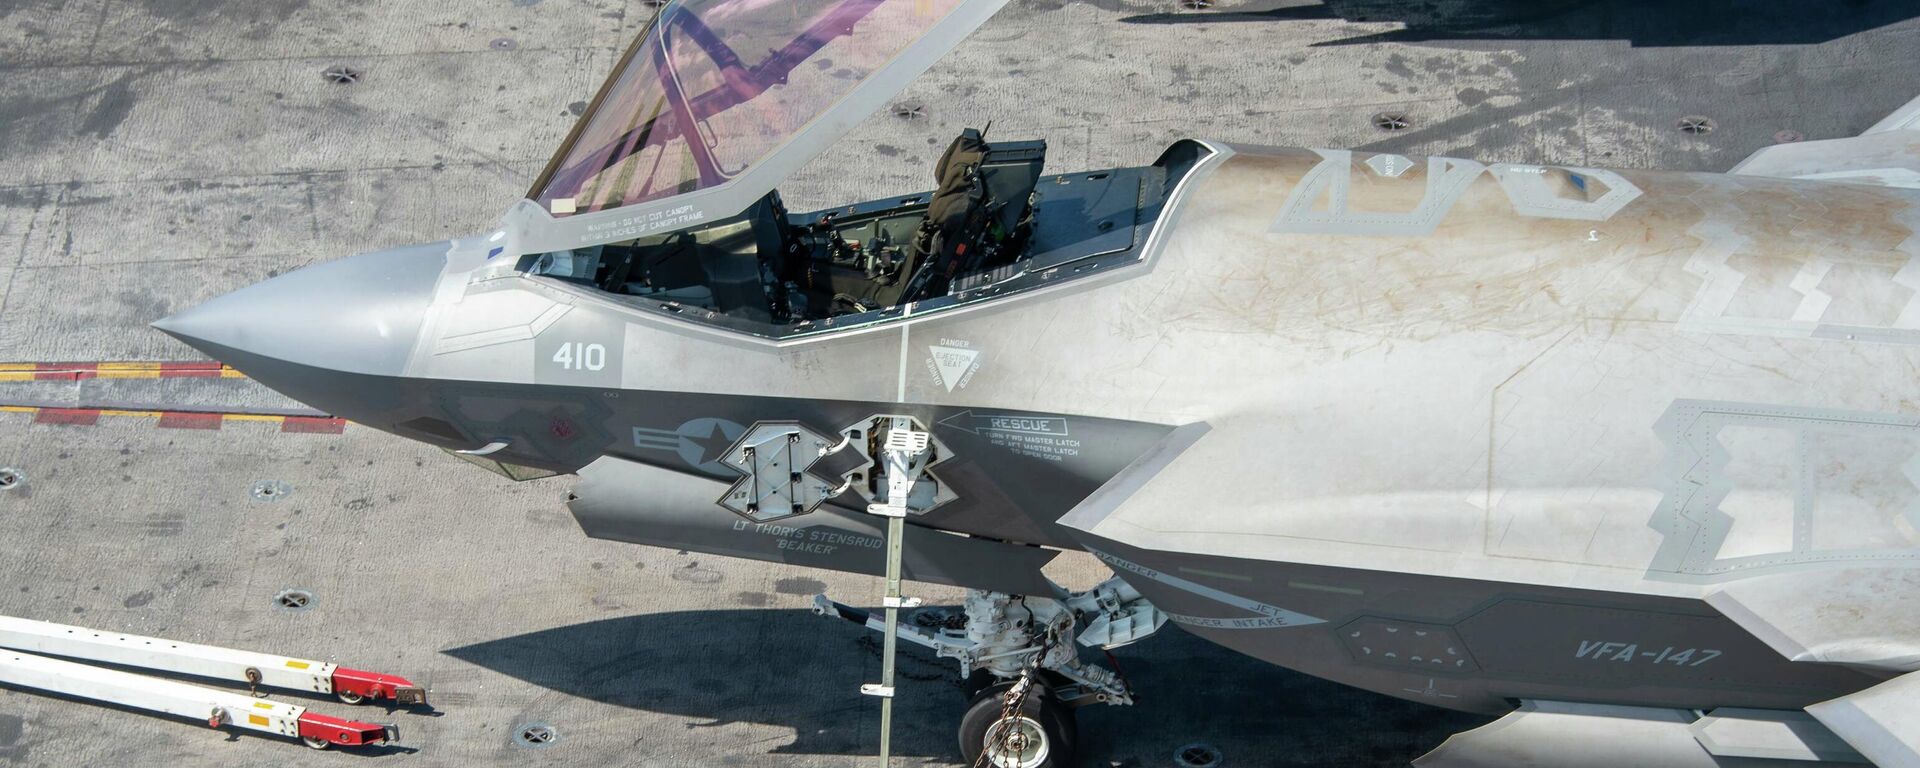 An F-35C Joint Strike Fighter on the USS Carl Vinson on January 10, 2022, showing rust-colored discoloration on its upper fuselage. - Sputnik International, 1920, 01.02.2022